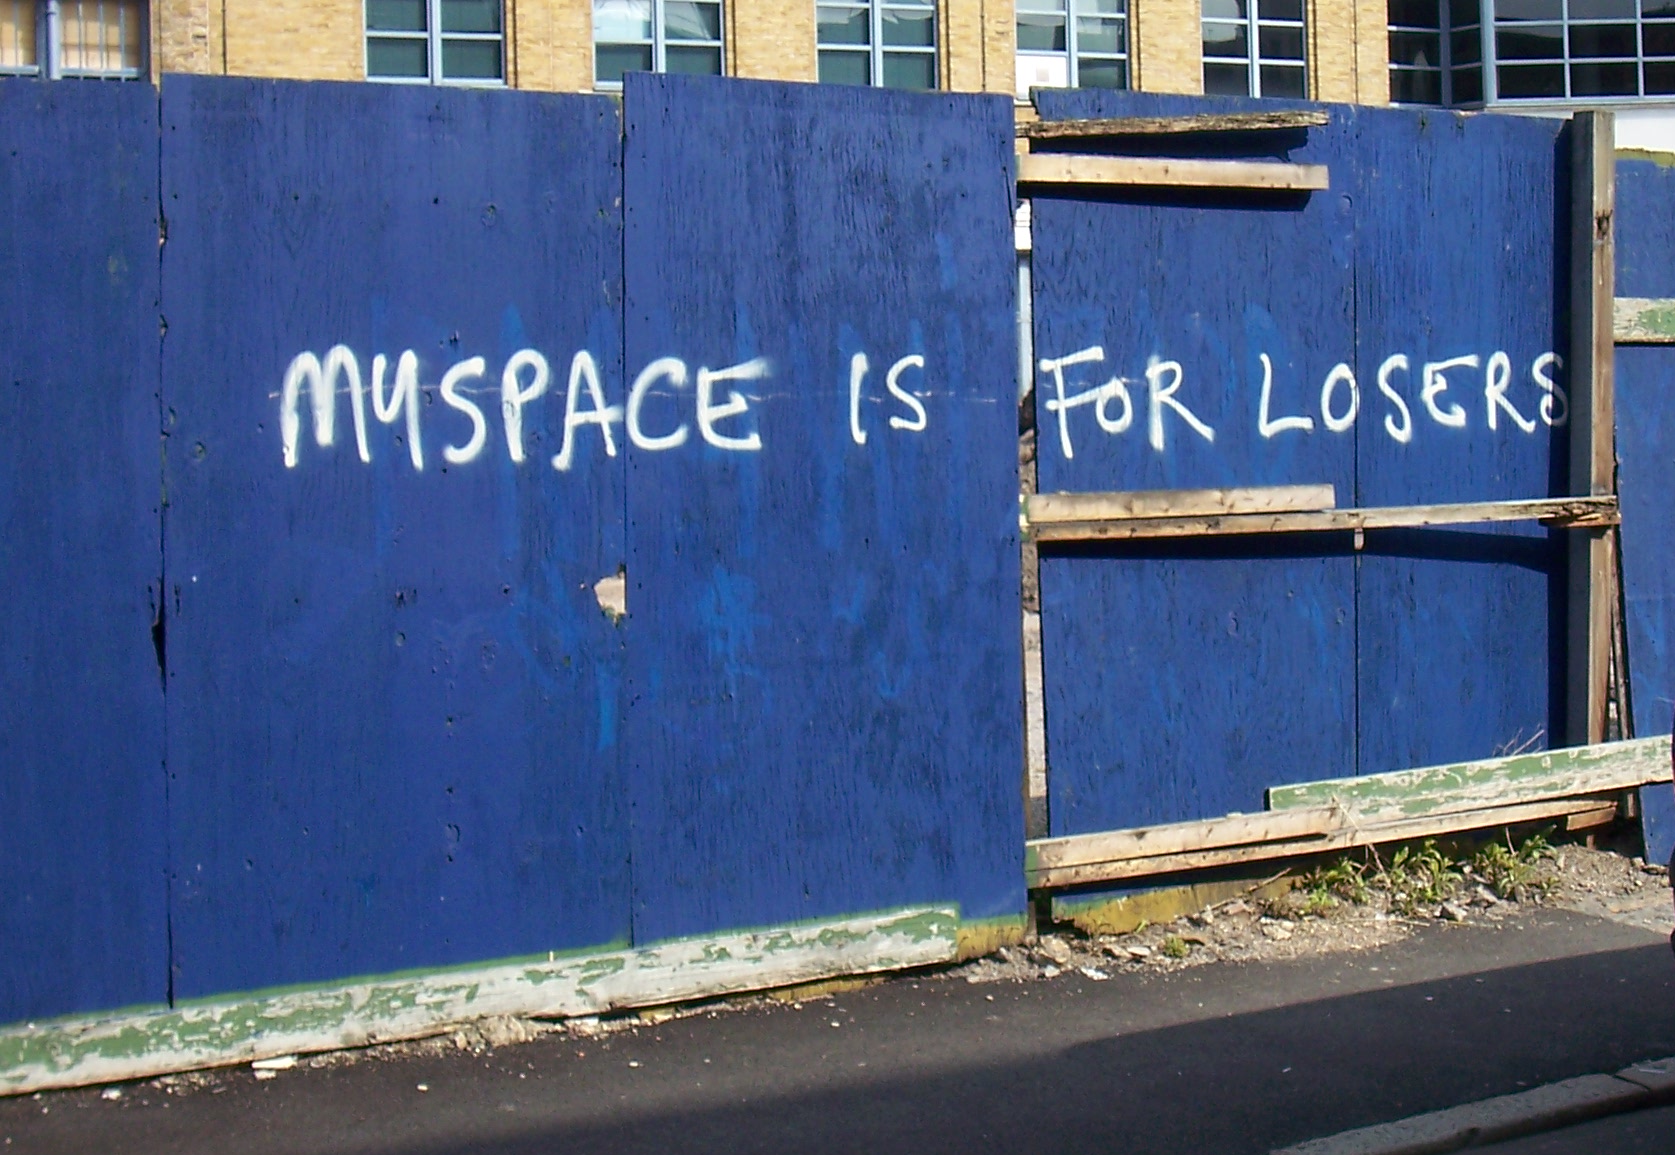 "Myspace is for losers" - Wikimedia Commons